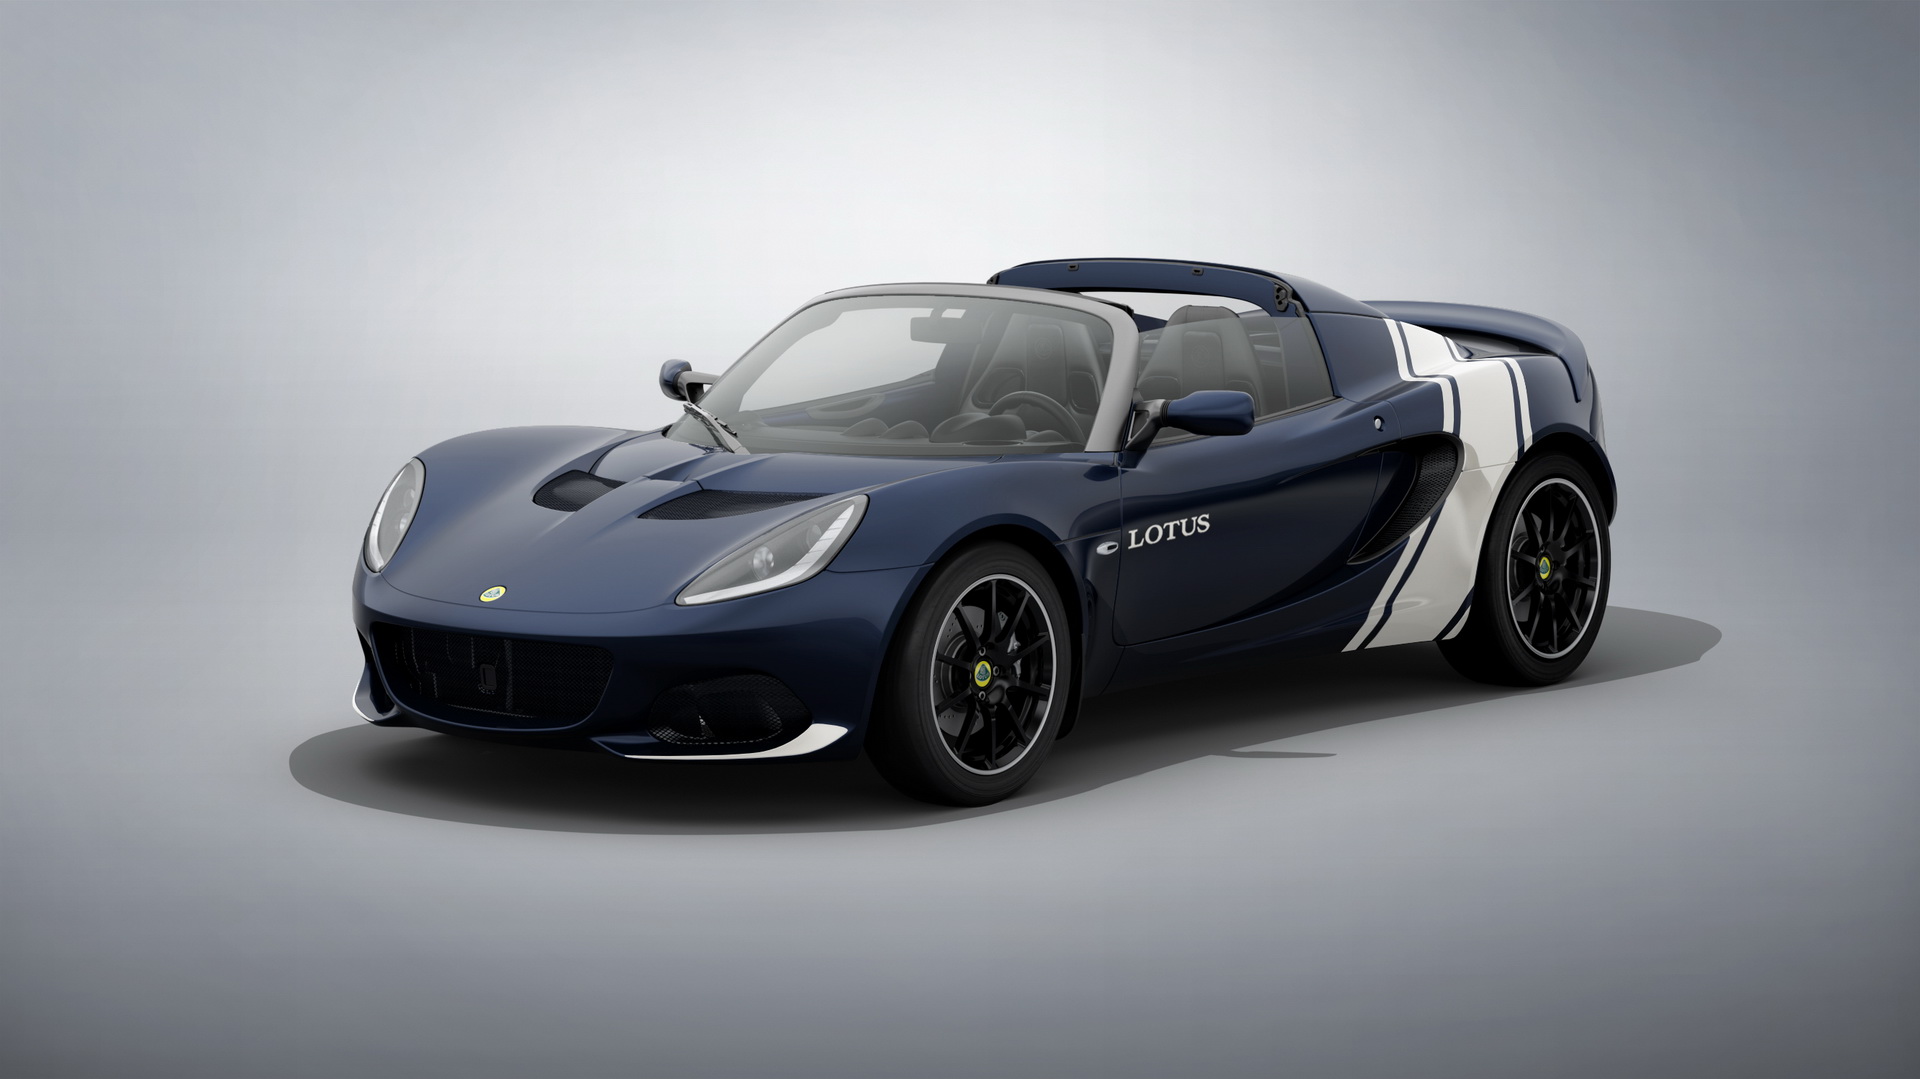 new lotus elise classic heritage editions add retro liveries and more kit carscoops new lotus elise classic heritage